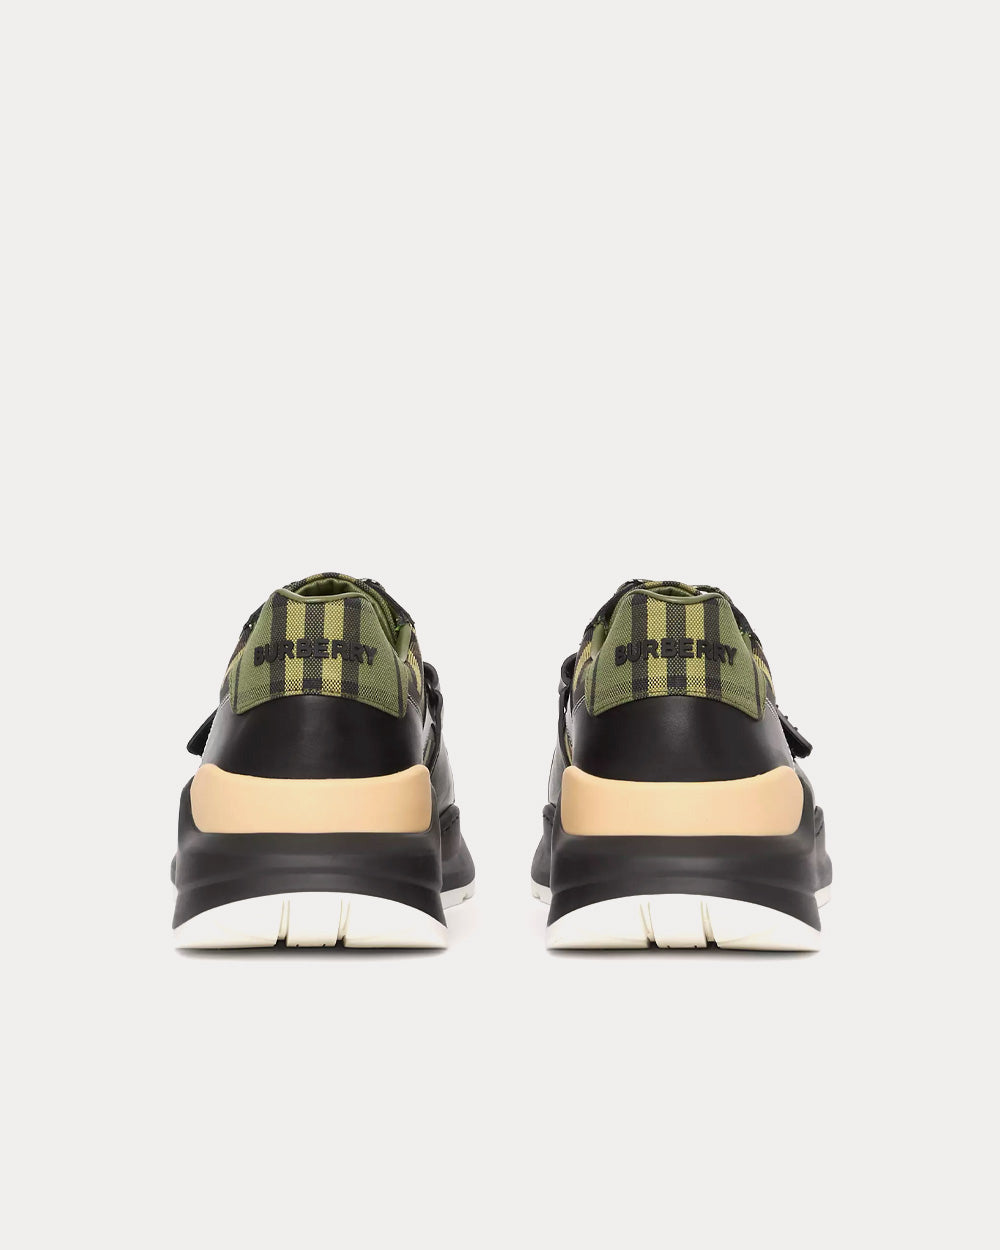 Burberry - Ramsey Check Cotton Canvas & Leather Military Green Low Top Sneakers